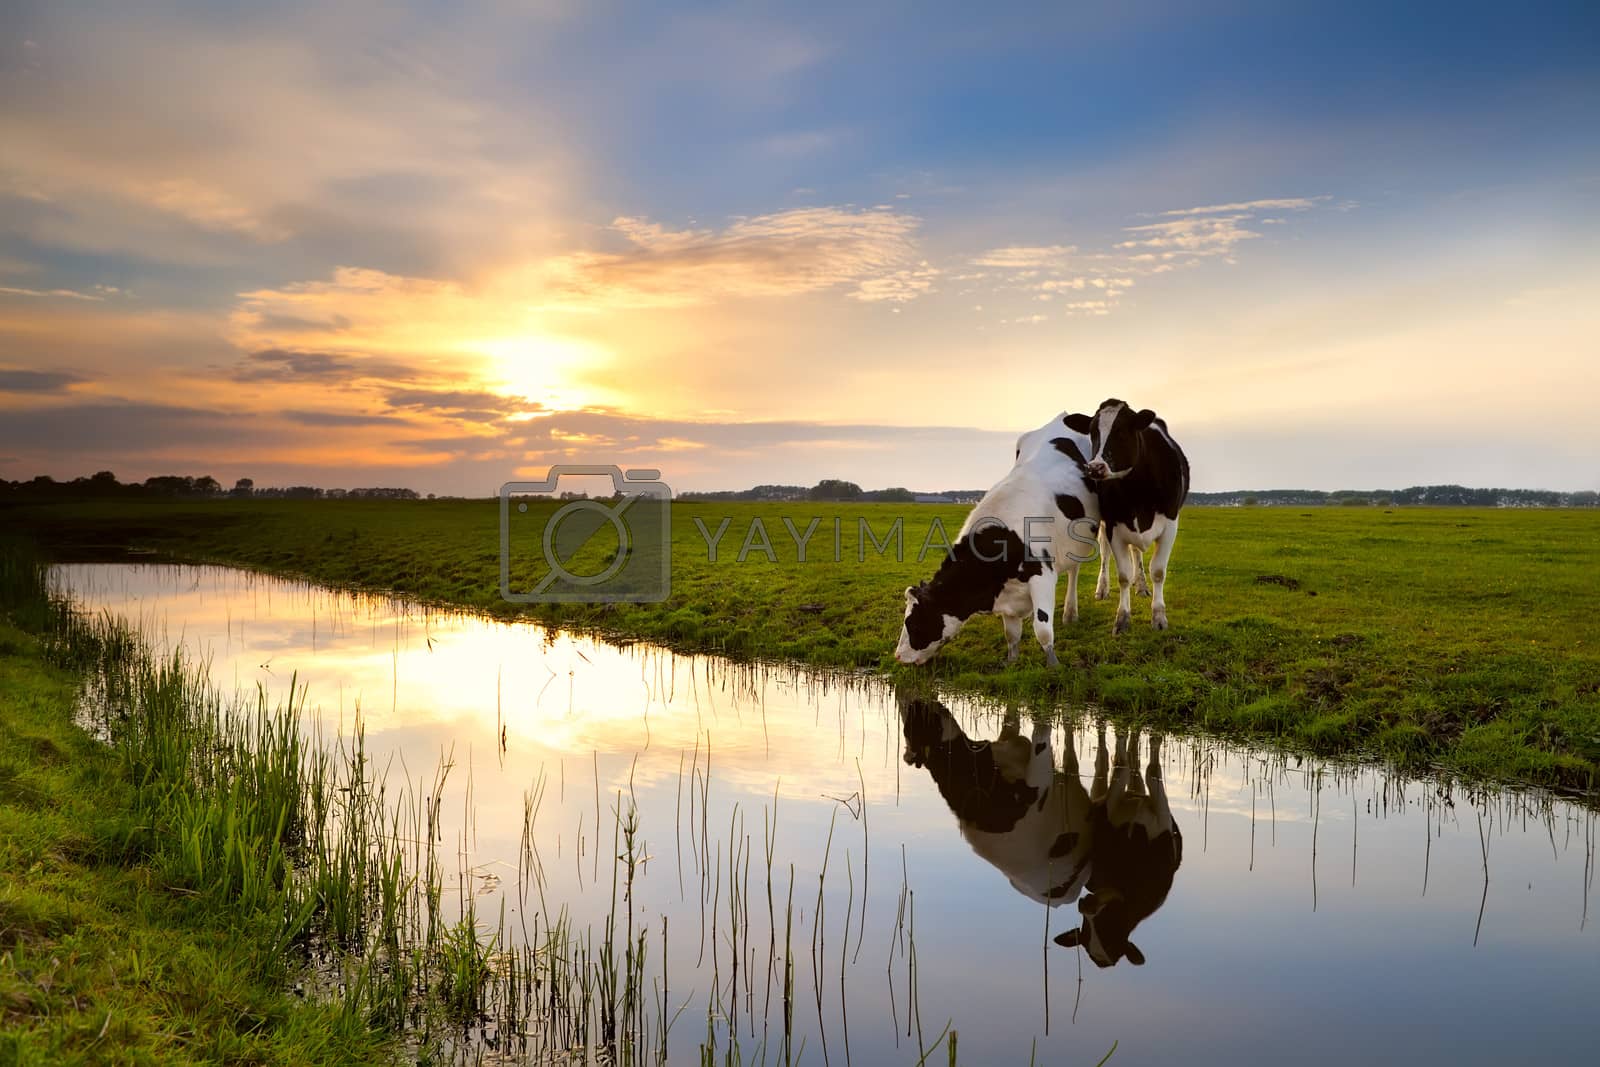 Royalty free image of two cows by river at sunset by catolla